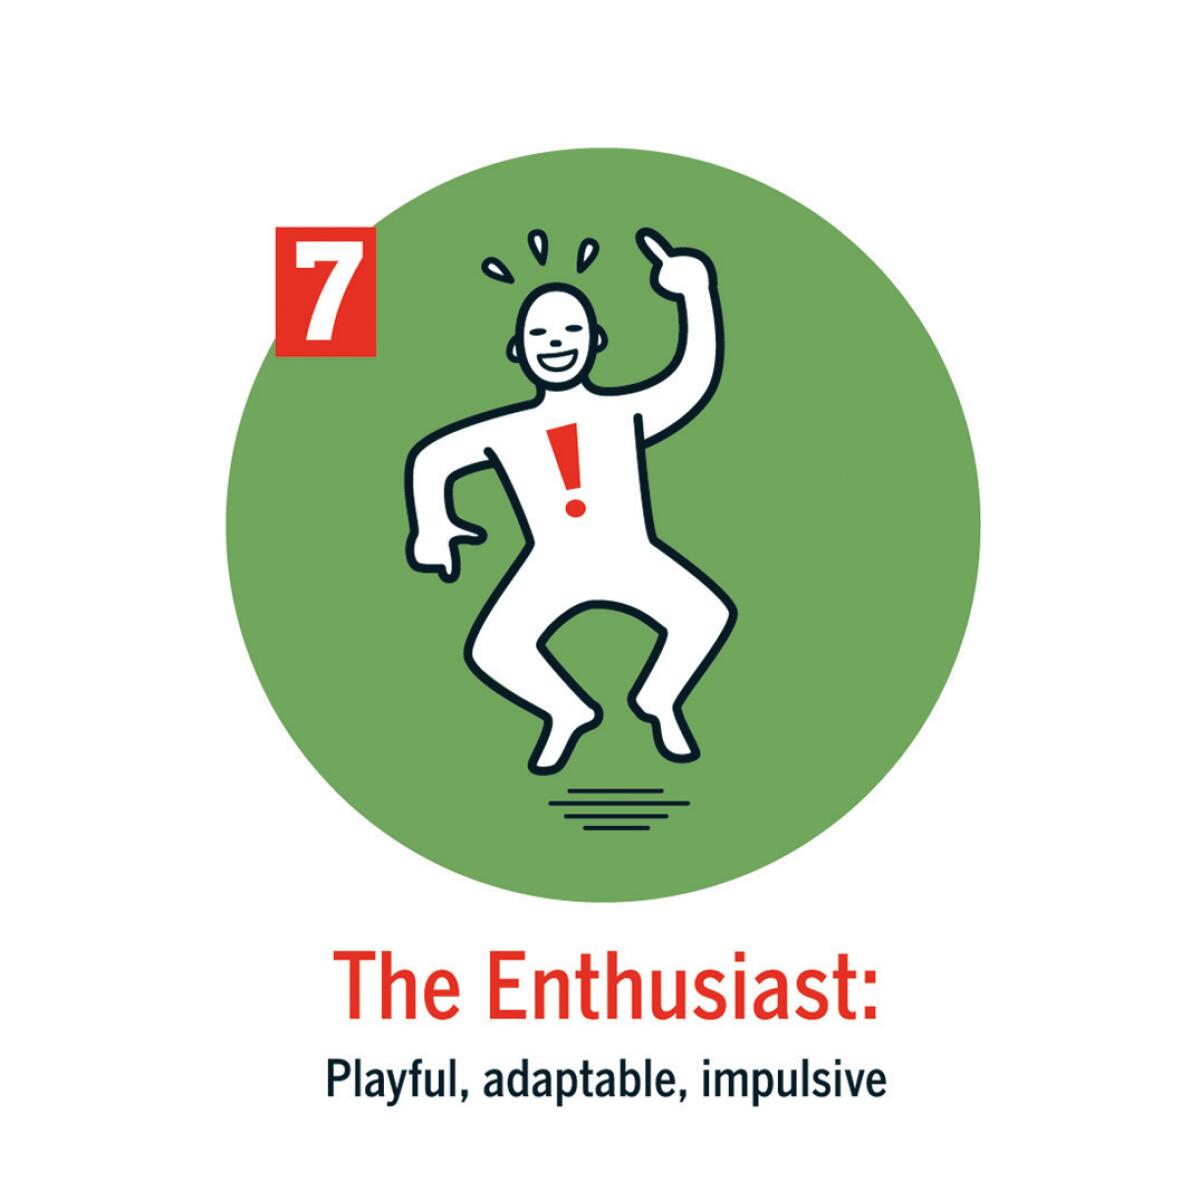 "The Enthusiast" is playful and impulsive.